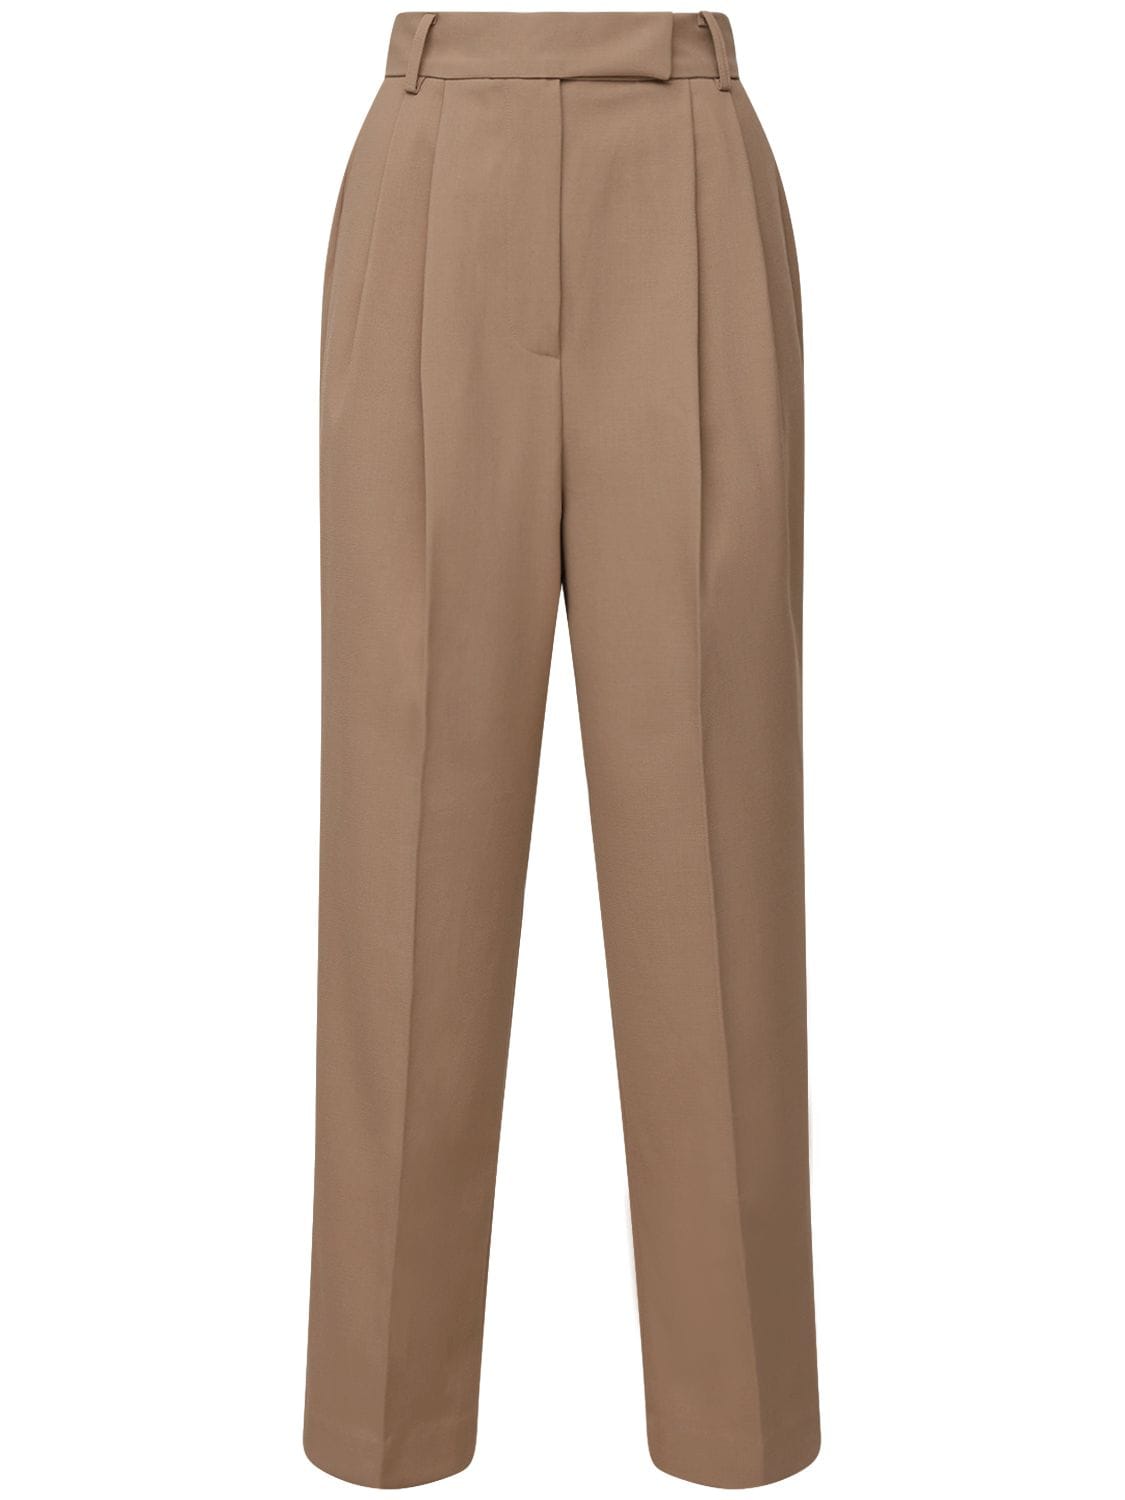 The Frankie Shop Bea Twill Straight Pants In Beige